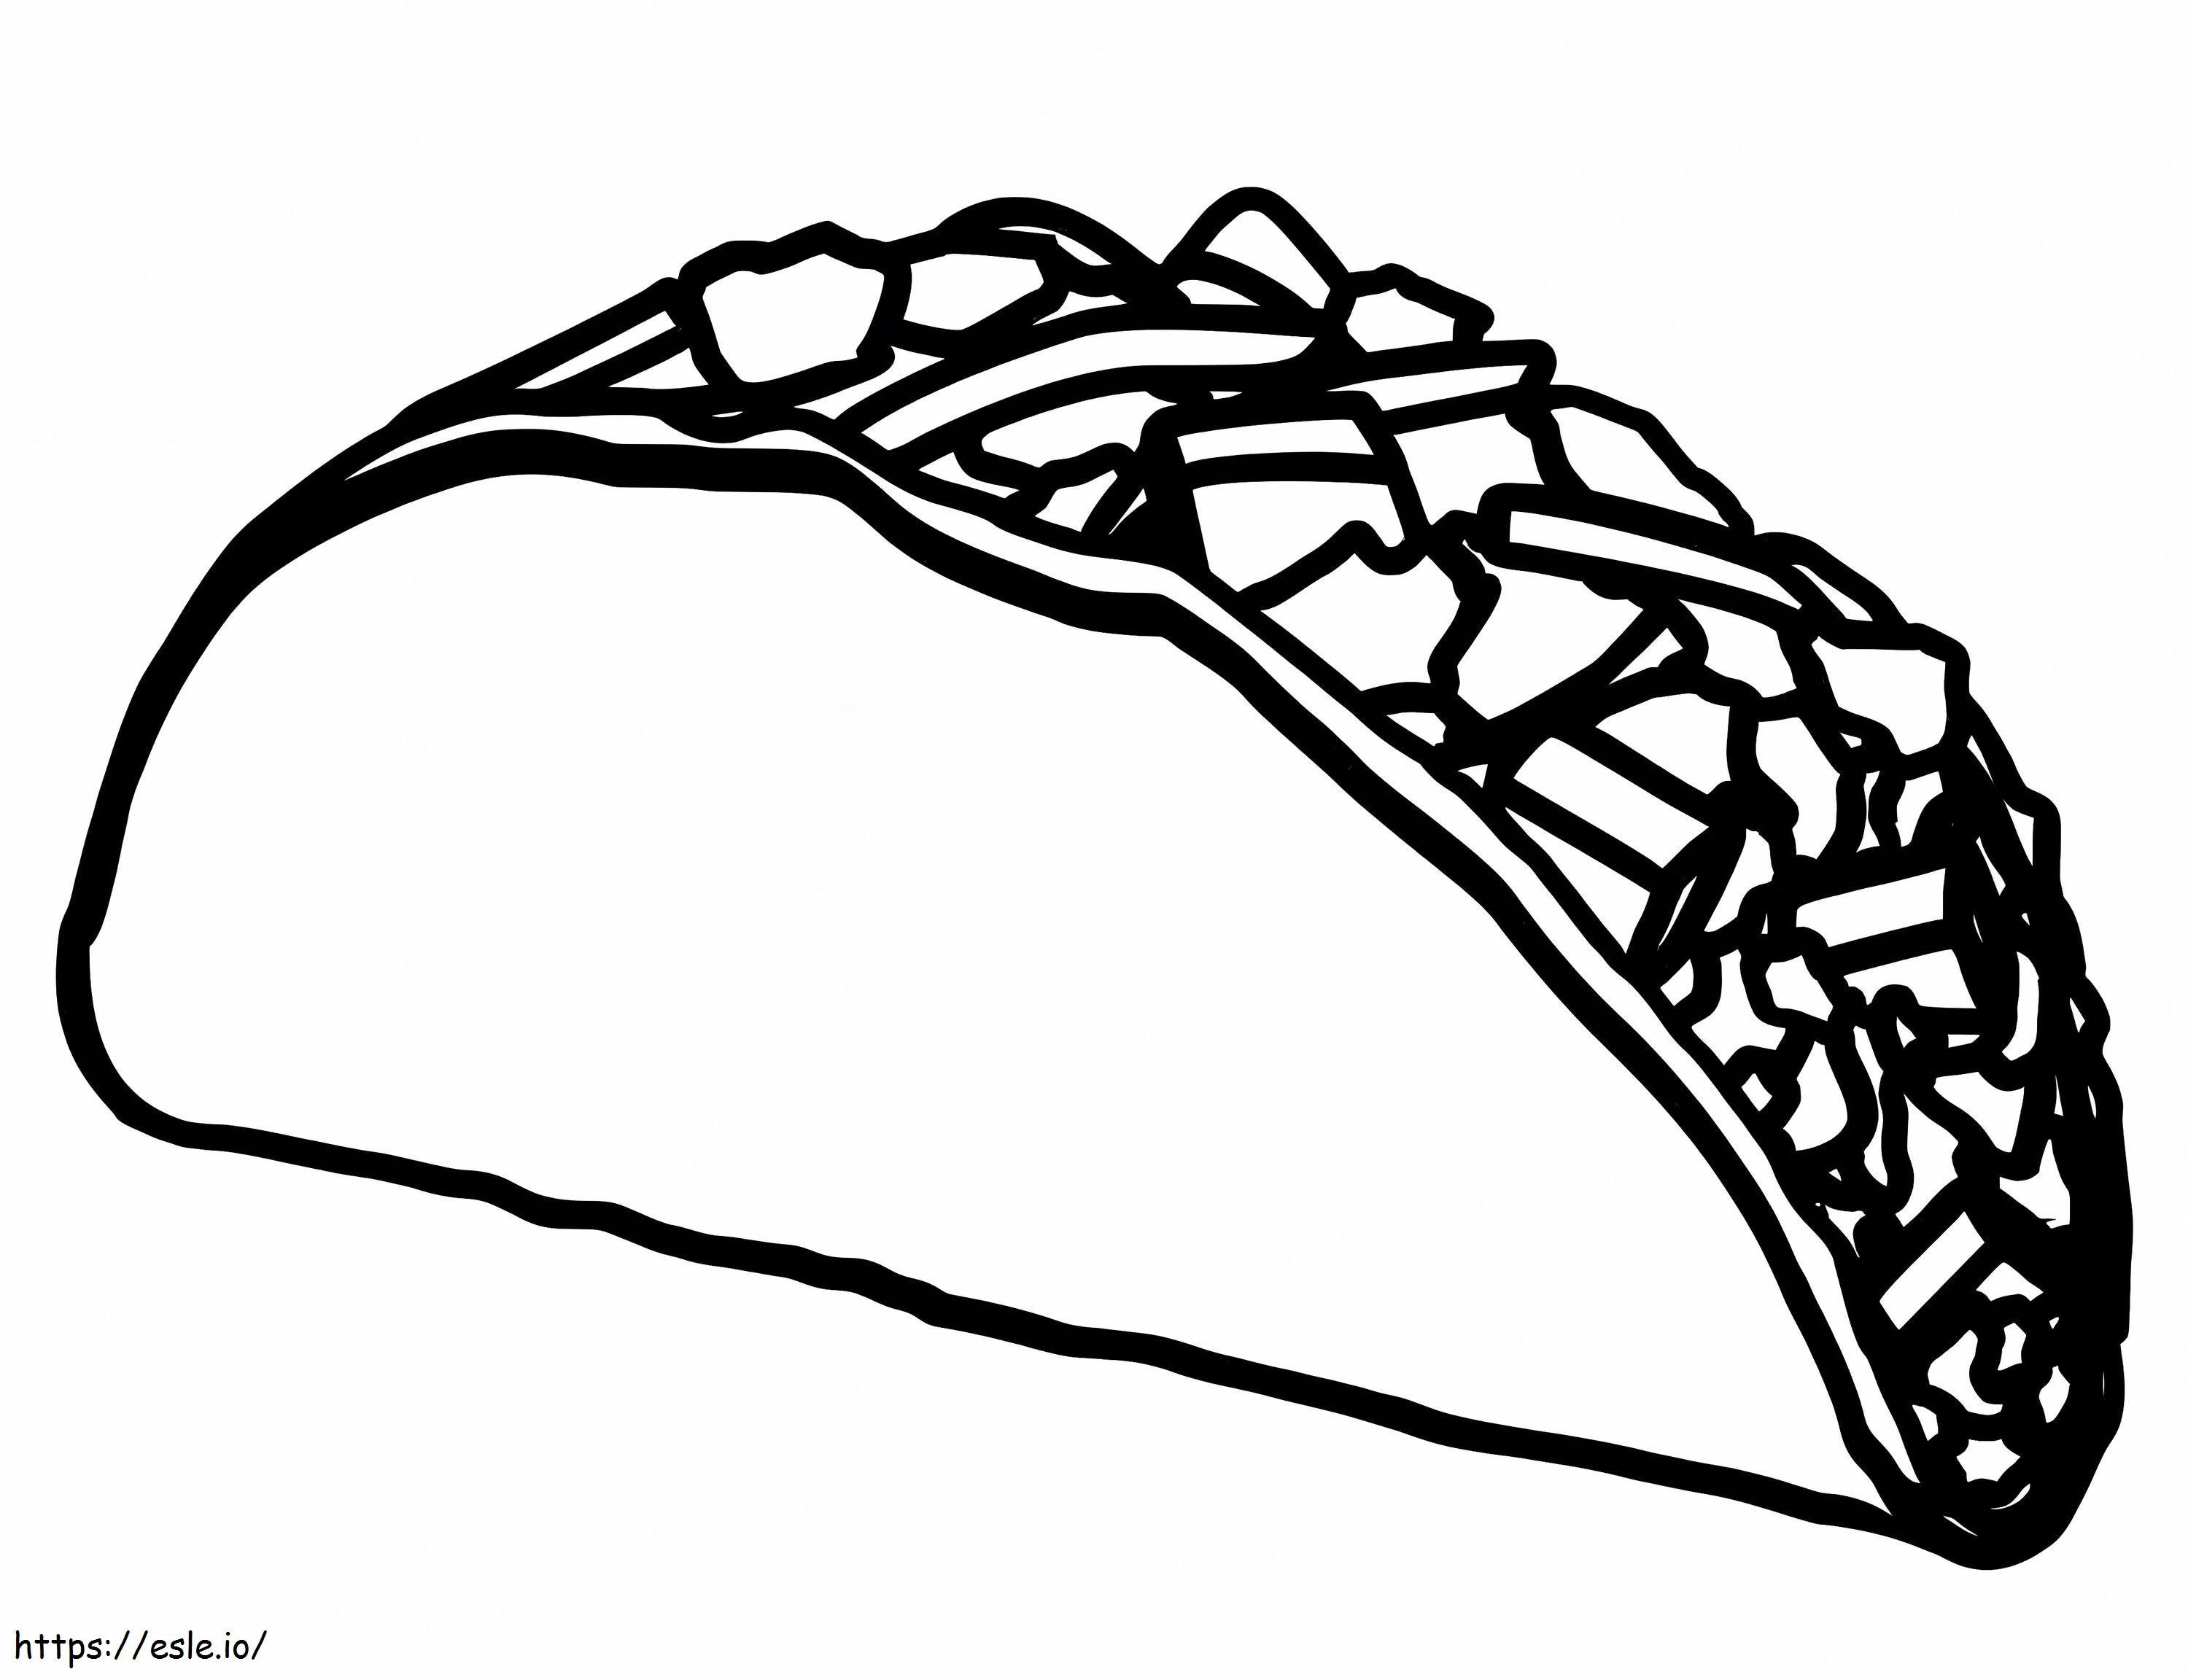 Simple Taco coloring page